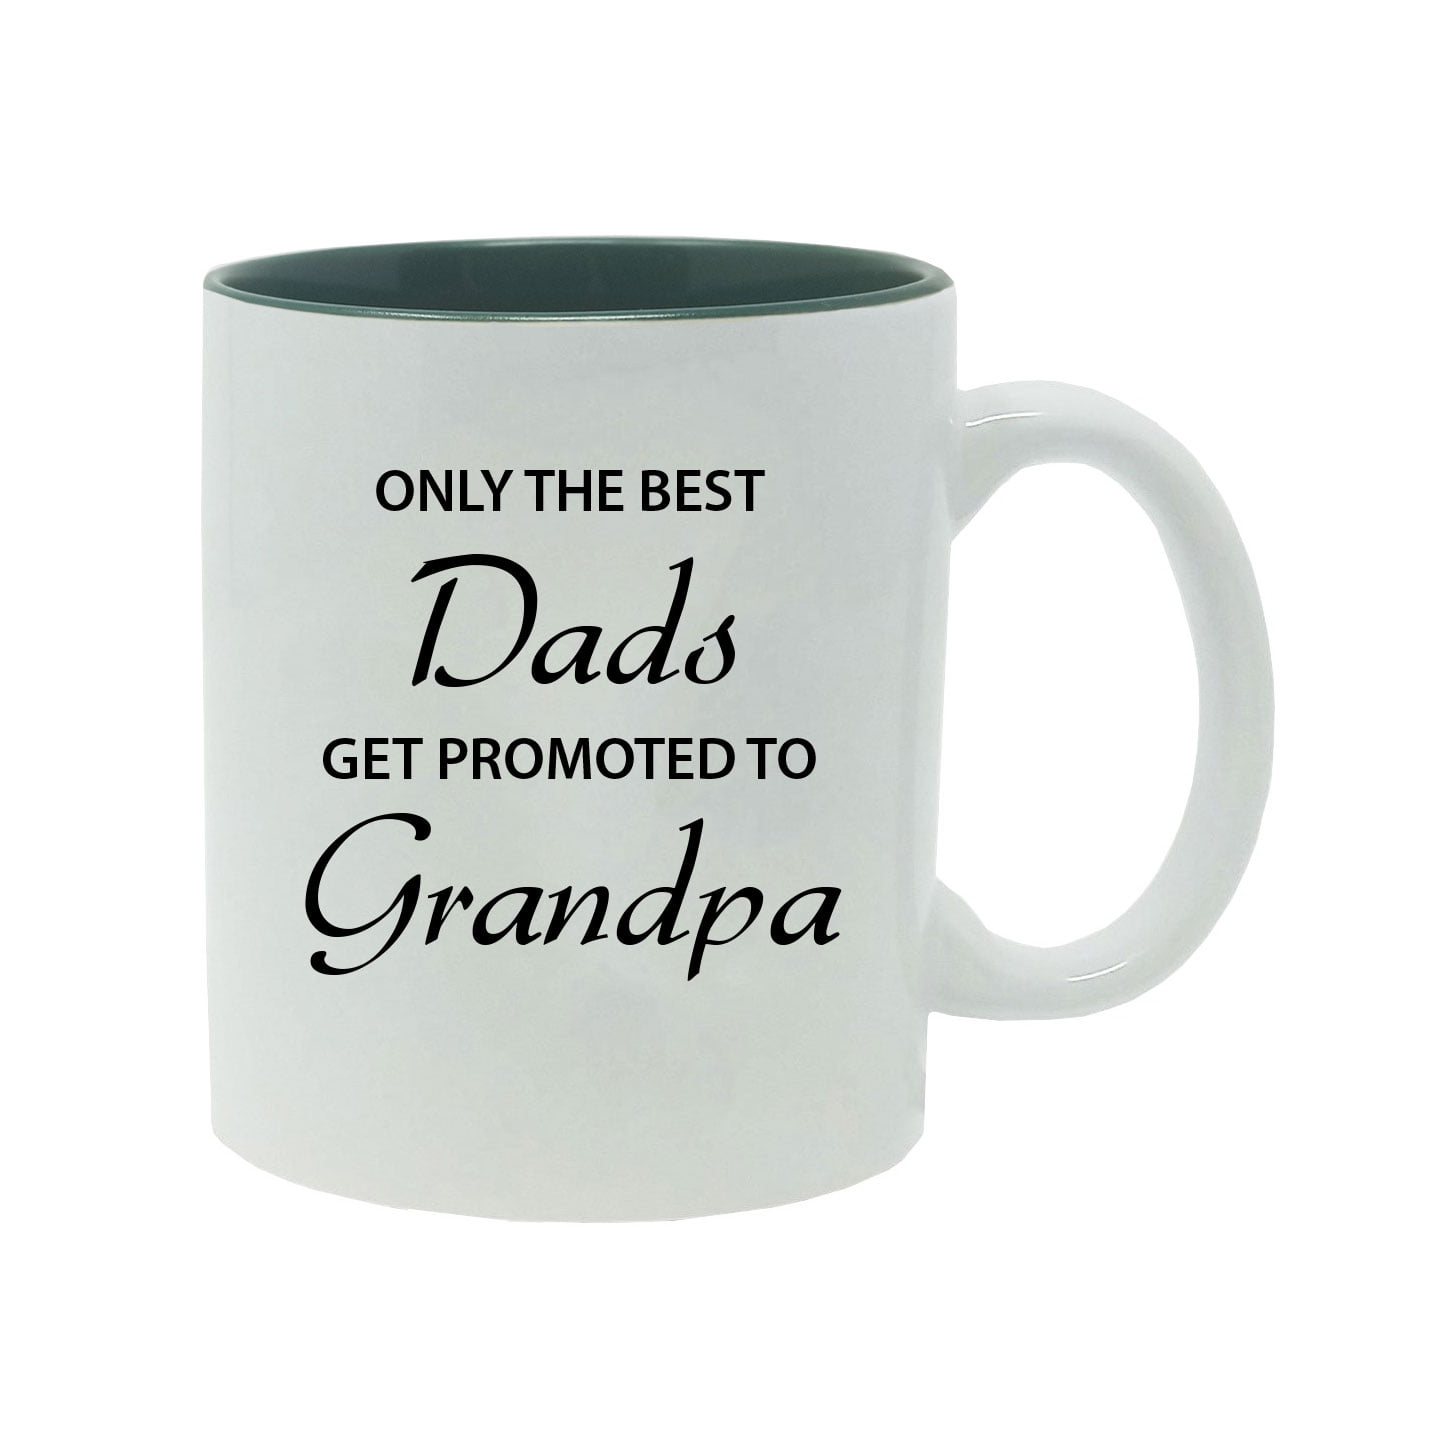 Get Promoted To Grandad.. Only The Best Dads.. Novelty Gift Mugs 